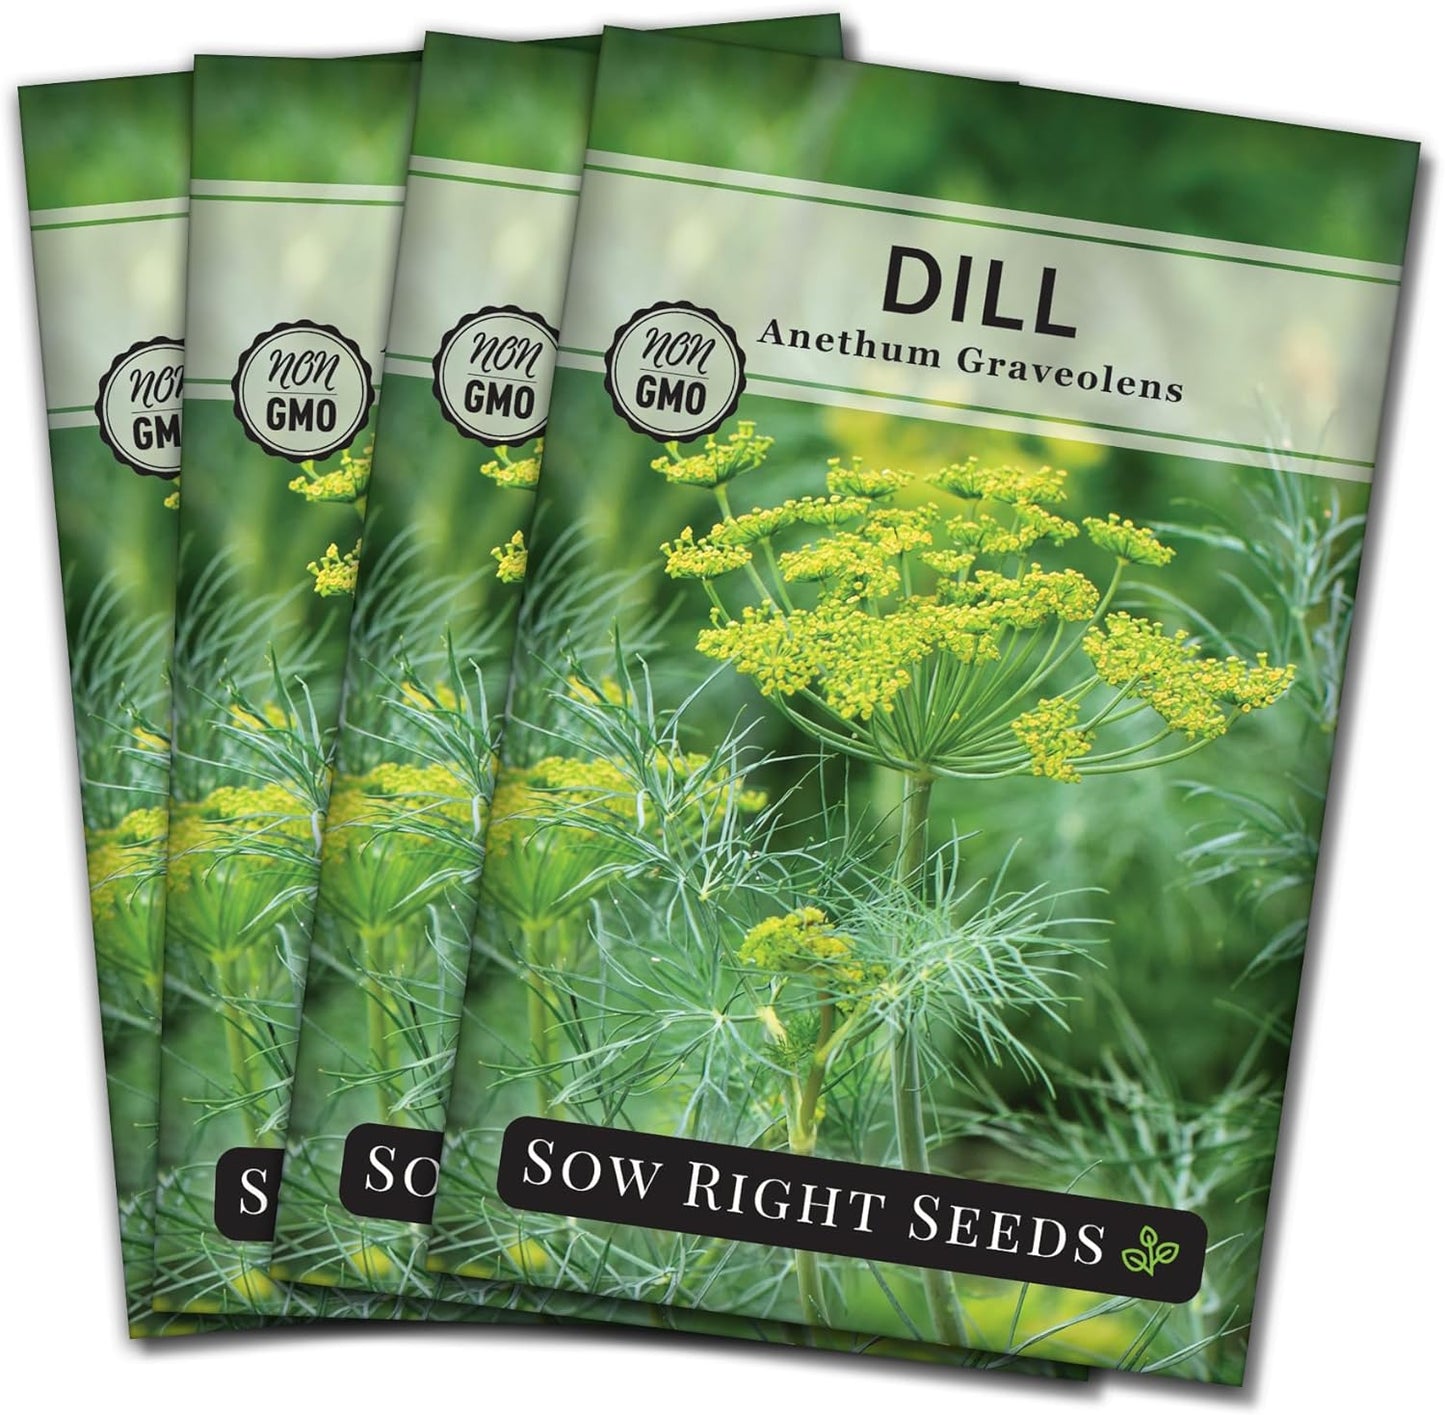 - Dill Seed for Planting - Non-Gmo Heirloom Packet with Instructions to Plant and Grow Kitchen Herb Garden - Indoors or Outdoors - Homemade Dill Pickles - Wonderful Companion Plant (4)